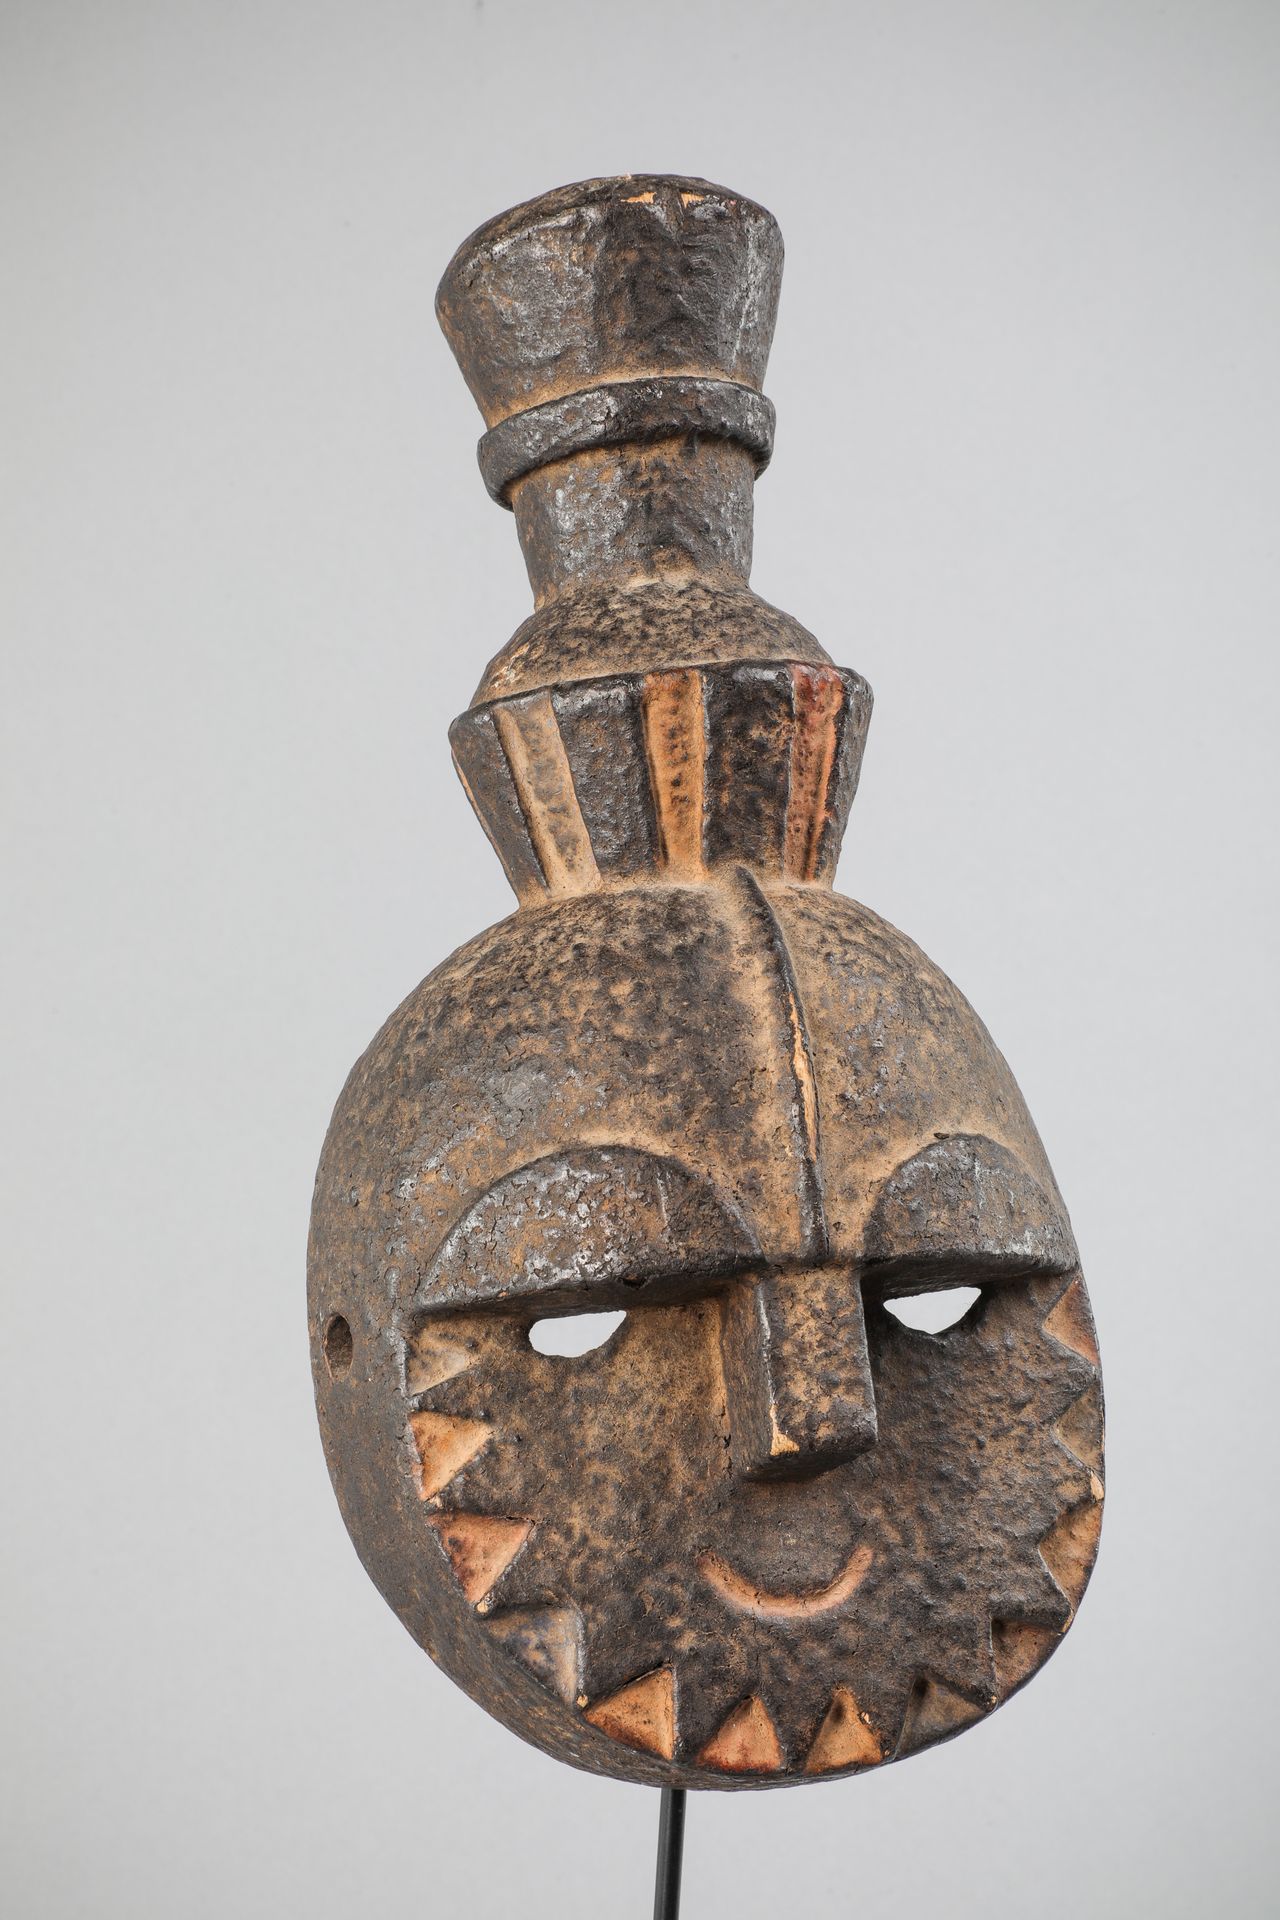 Null Eket mask, Nigeria. Face with geometric treatment surmounted by a stylized &hellip;